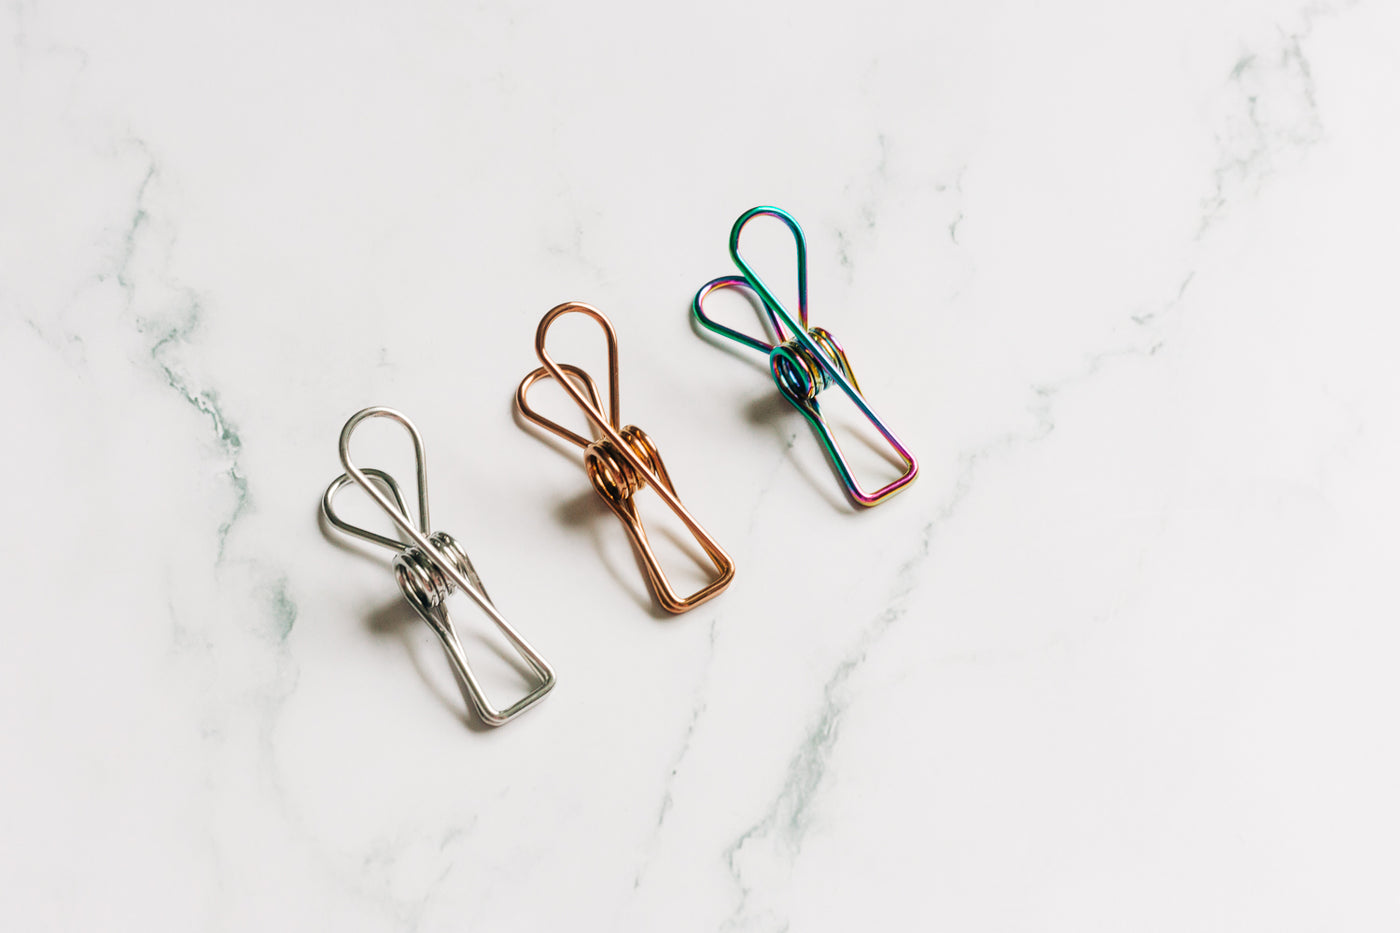 Stainless Steel 316 Marine Grade Clothing Pegs 3 different colours: rose gold, rainbow and classic silver